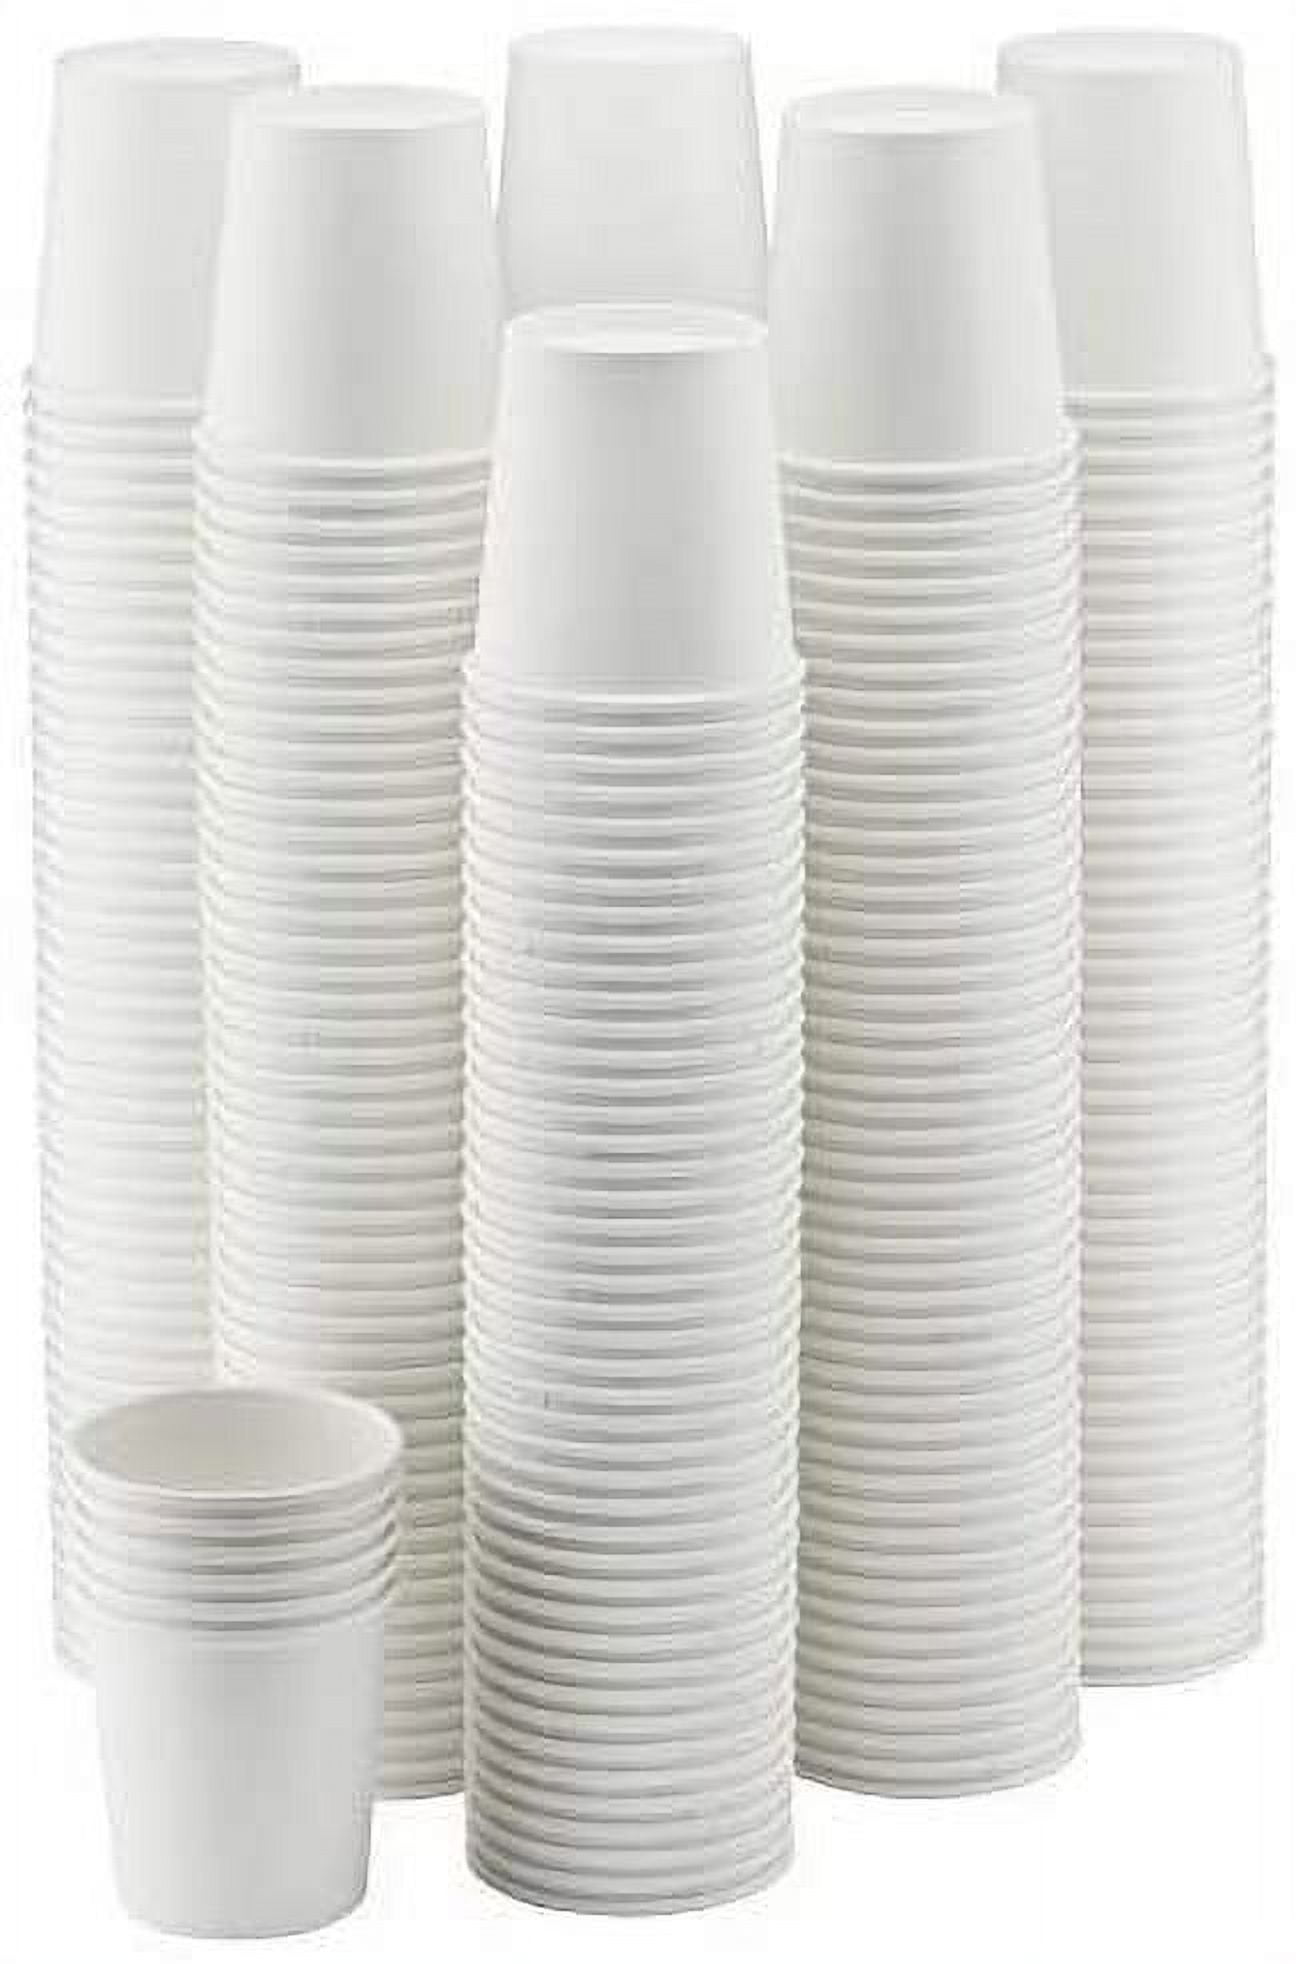 Occasions 120 Mugs Pack, Heavyweight Disposable Wedding Party Plastic 8 oz Coffee Mugs /tea Cups/Cappuccino Cups/Espresso Cup with Handles (8 oz Mugs